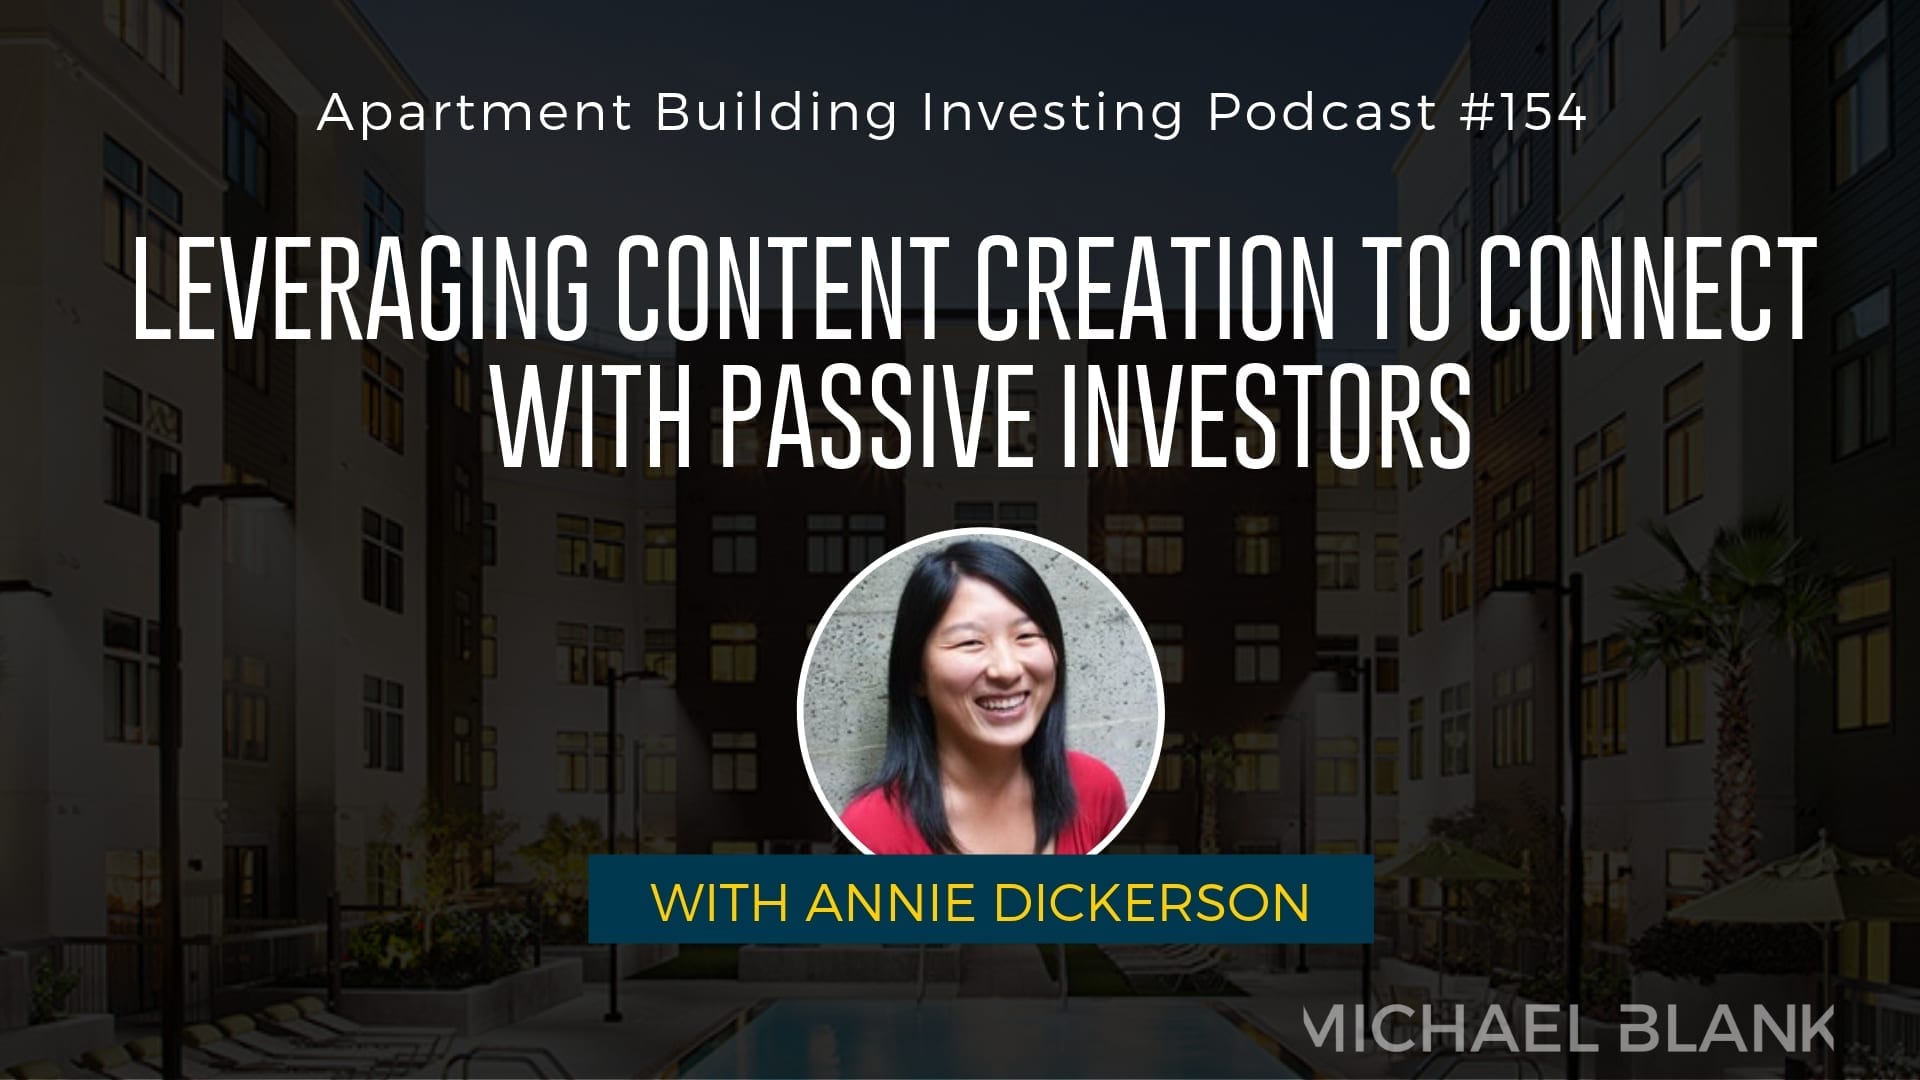 MB 154: Leveraging Content Creation to Connect with Passive Investors – With Annie Dickerson